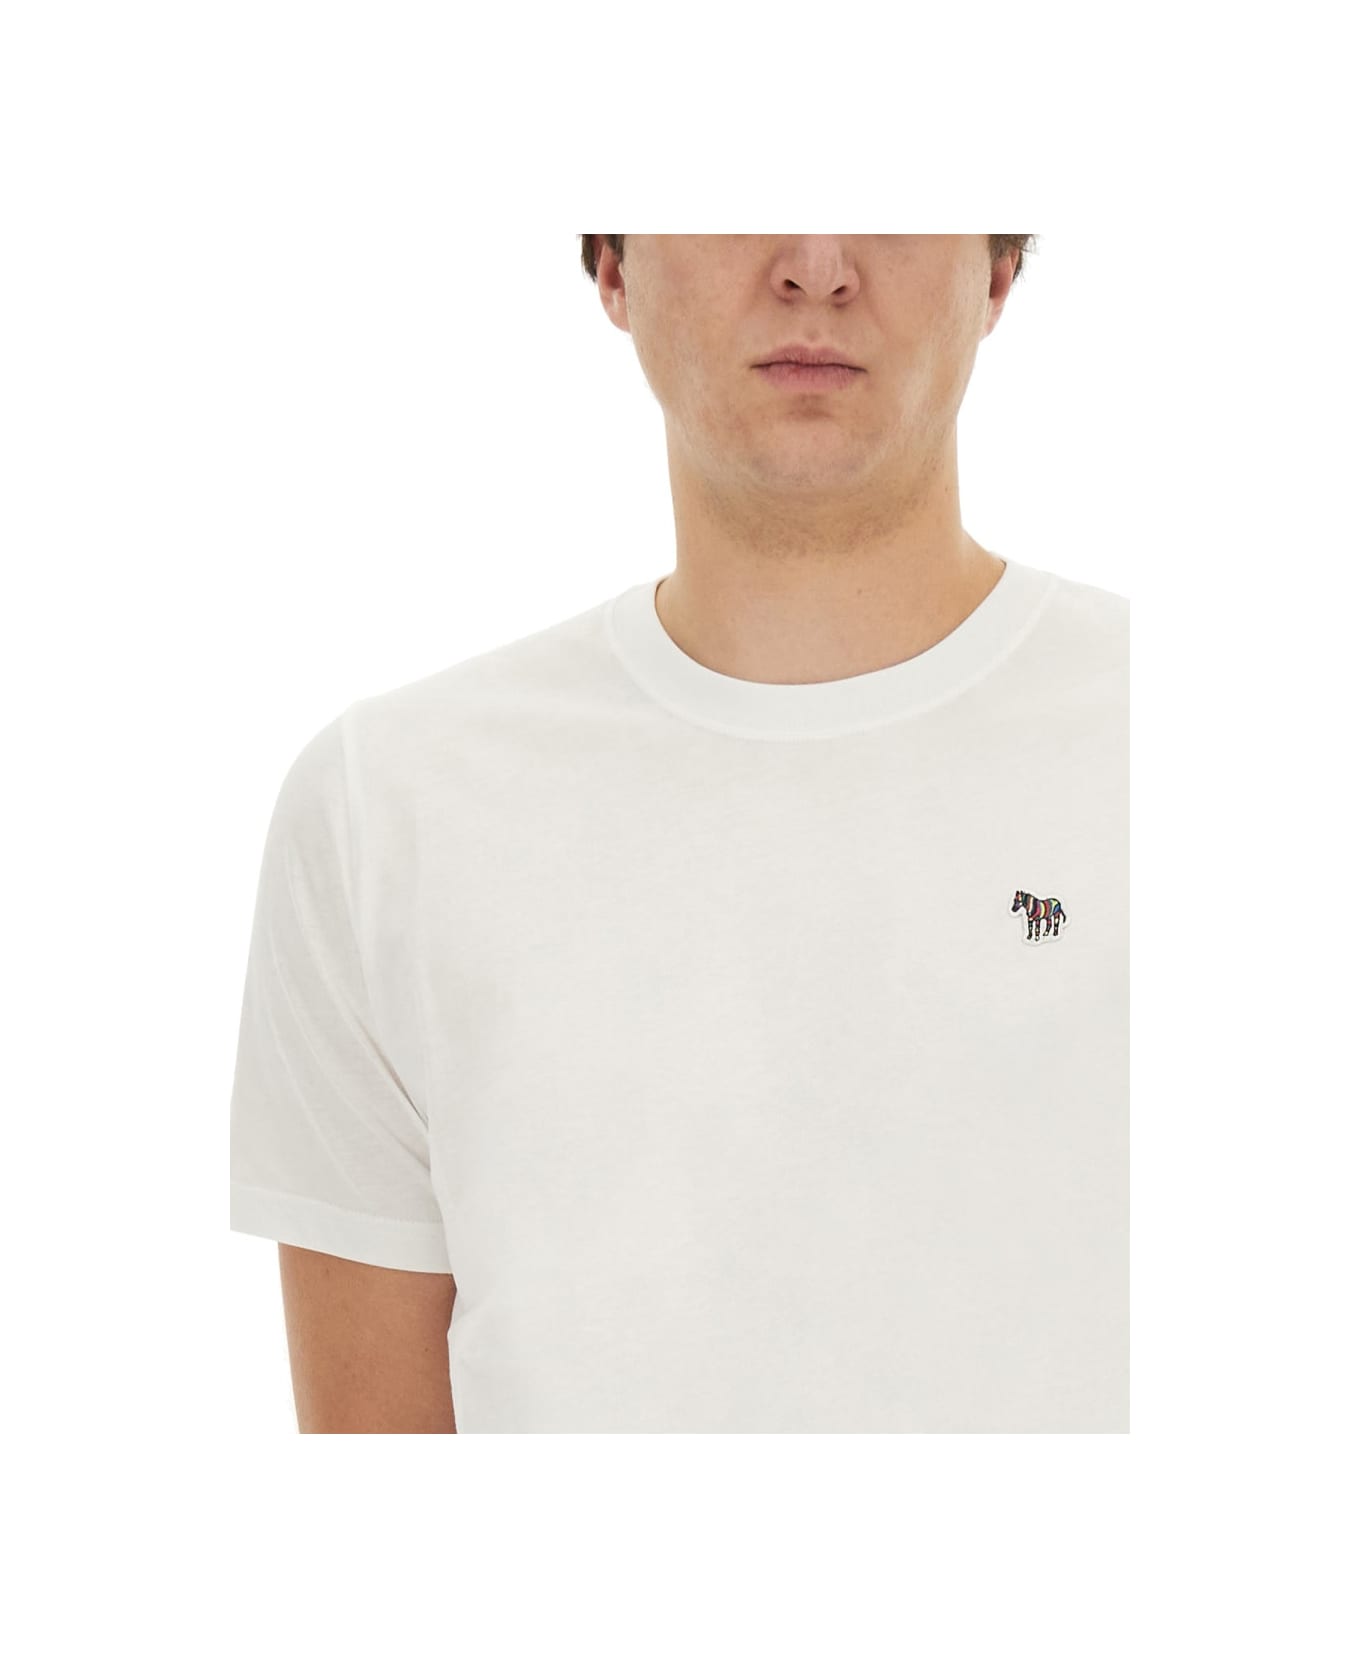 PS by Paul Smith Zebra Patch T-shirt - WHITE シャツ